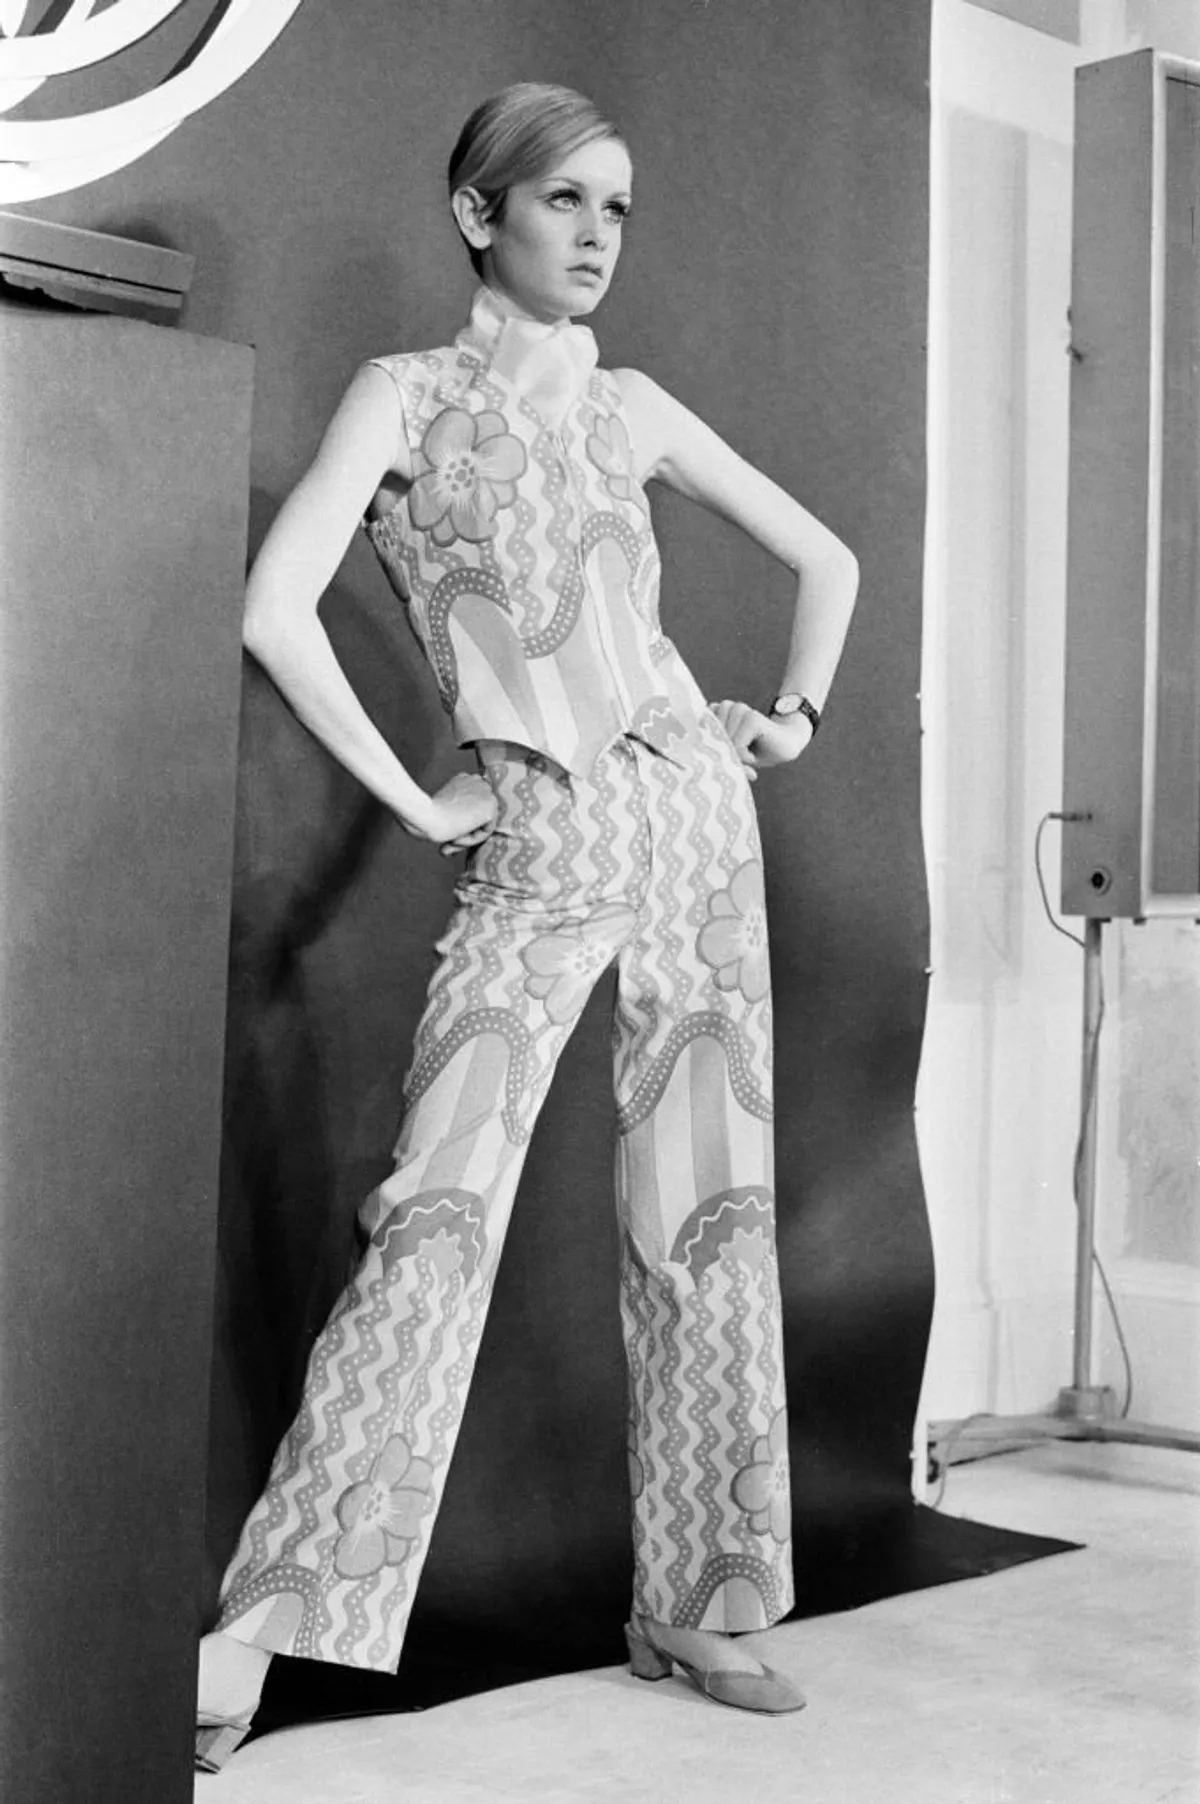 Twiggy's photoshoot as she launches new collection, The Twiggy Look Collection, London, February 16, 1967. | Photo: Getty Images